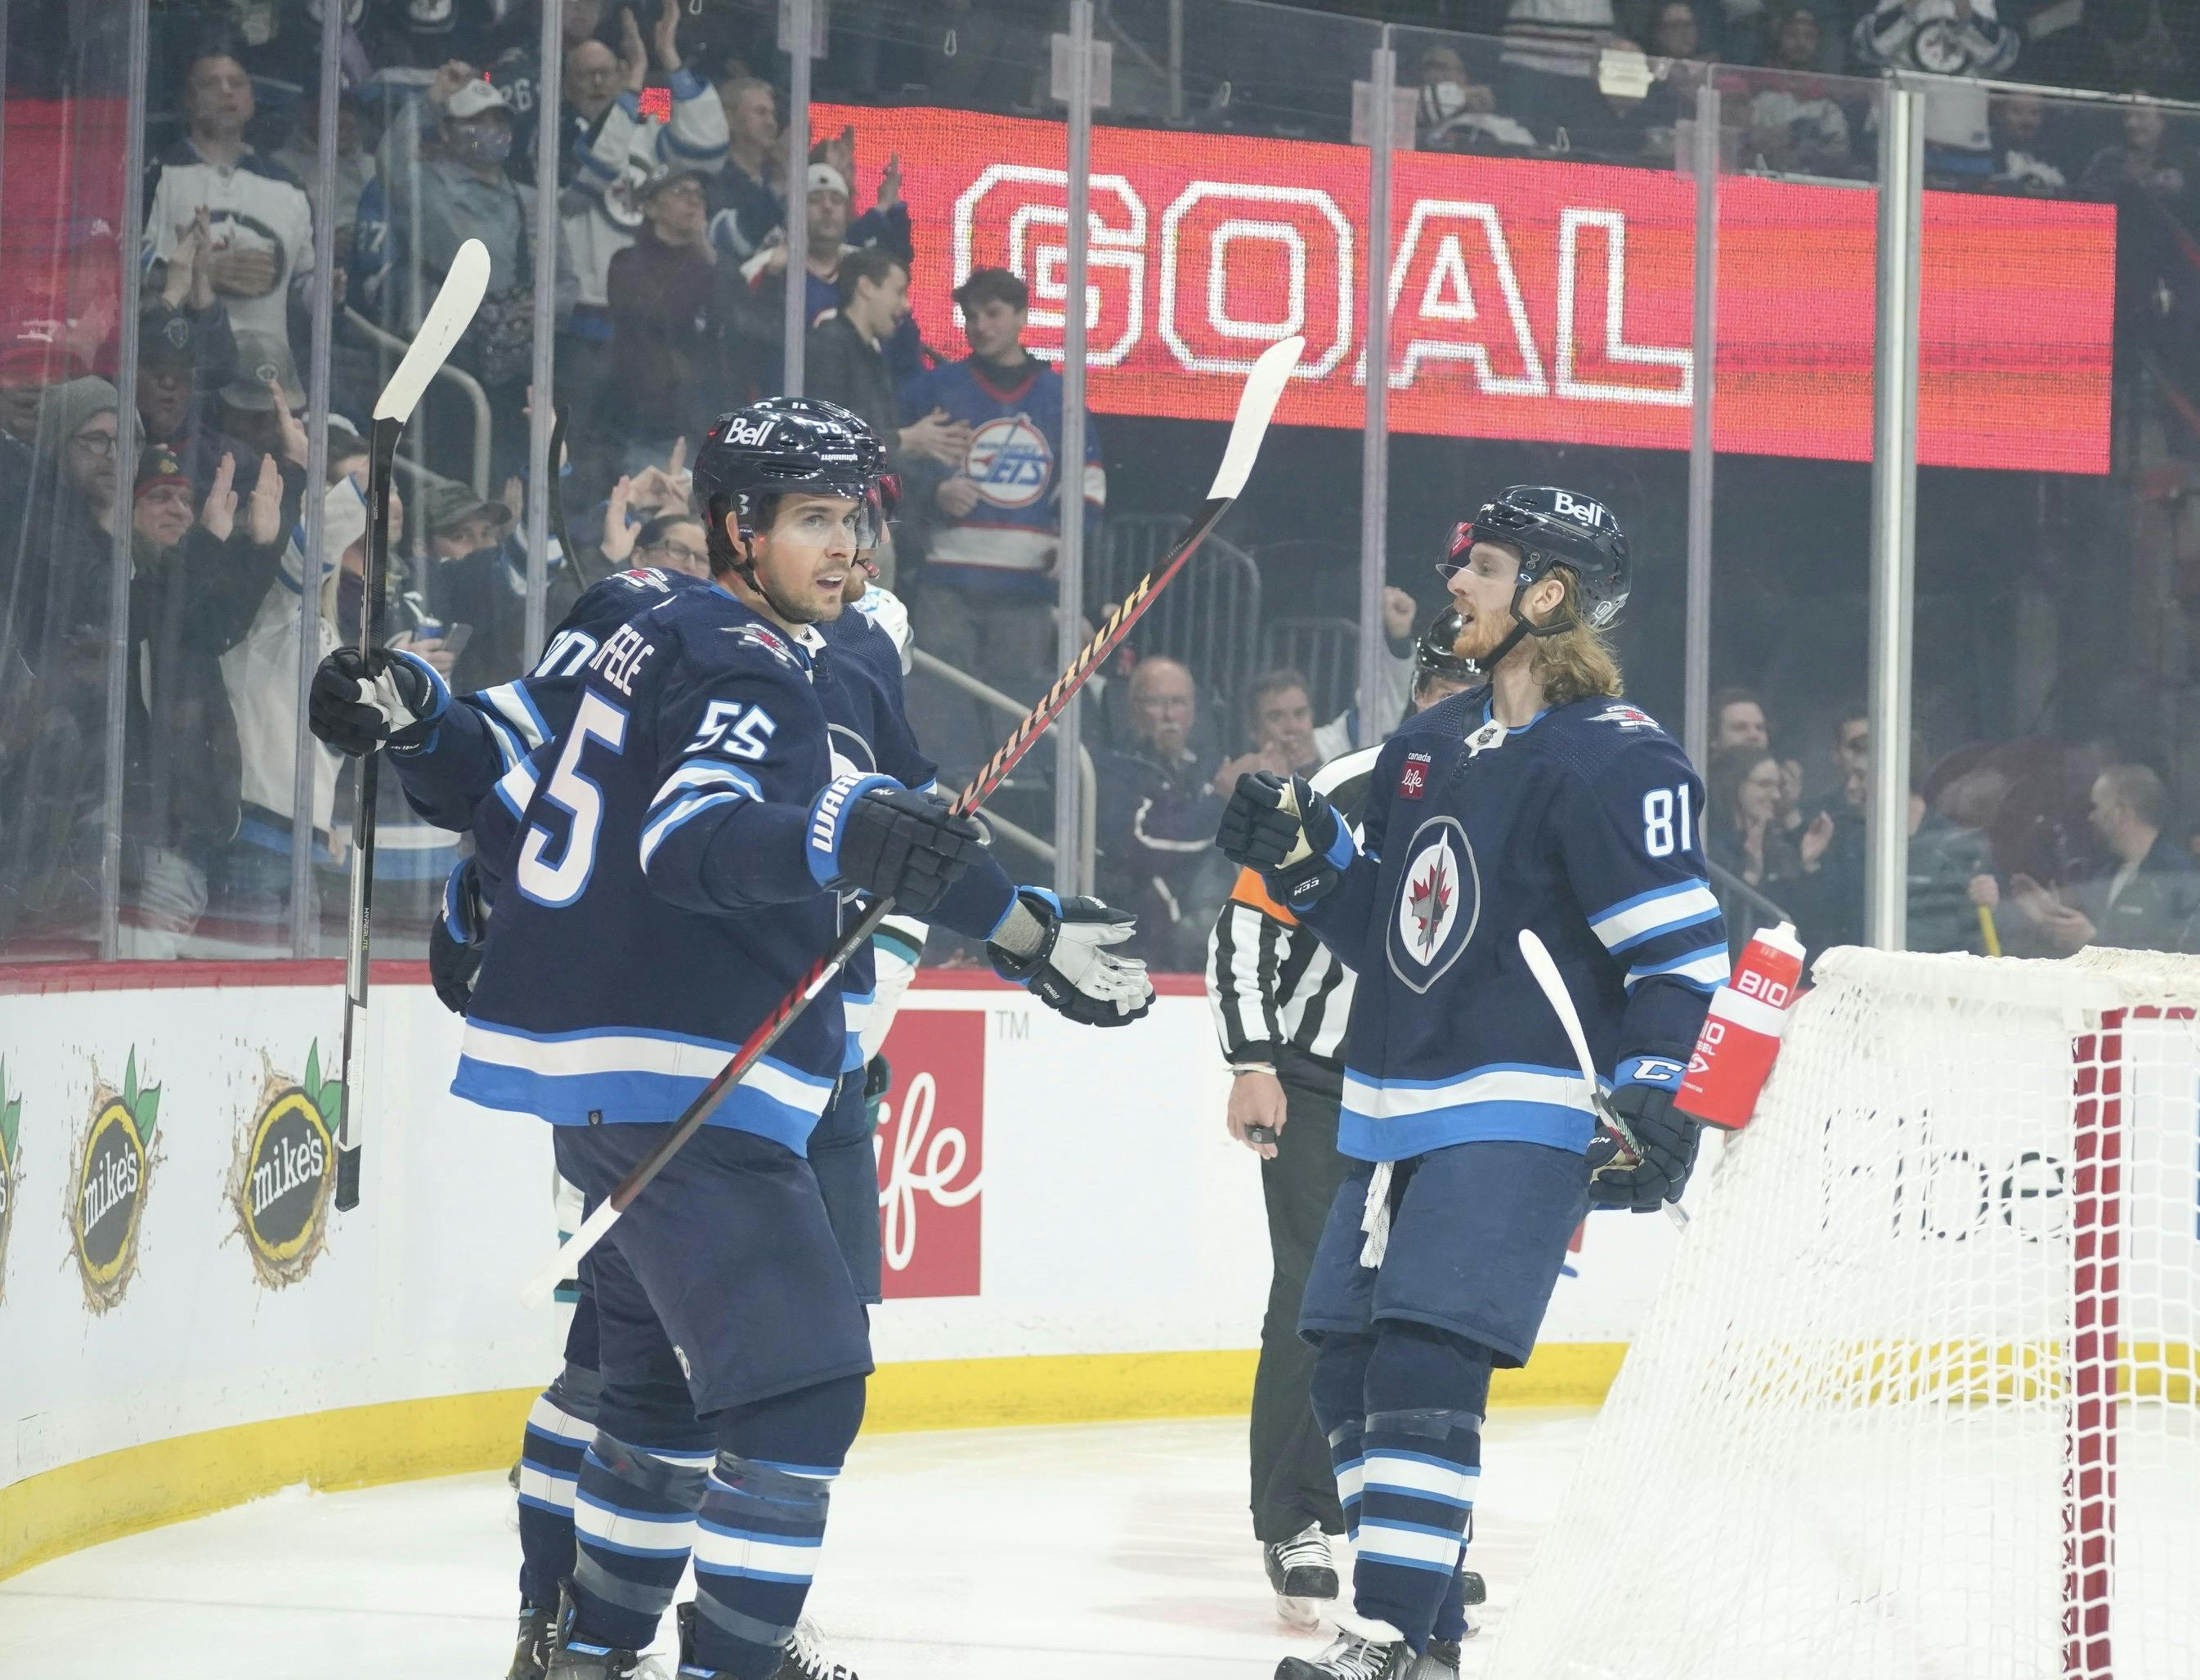 Jets Lose Game 2, Come Home With Series Tied